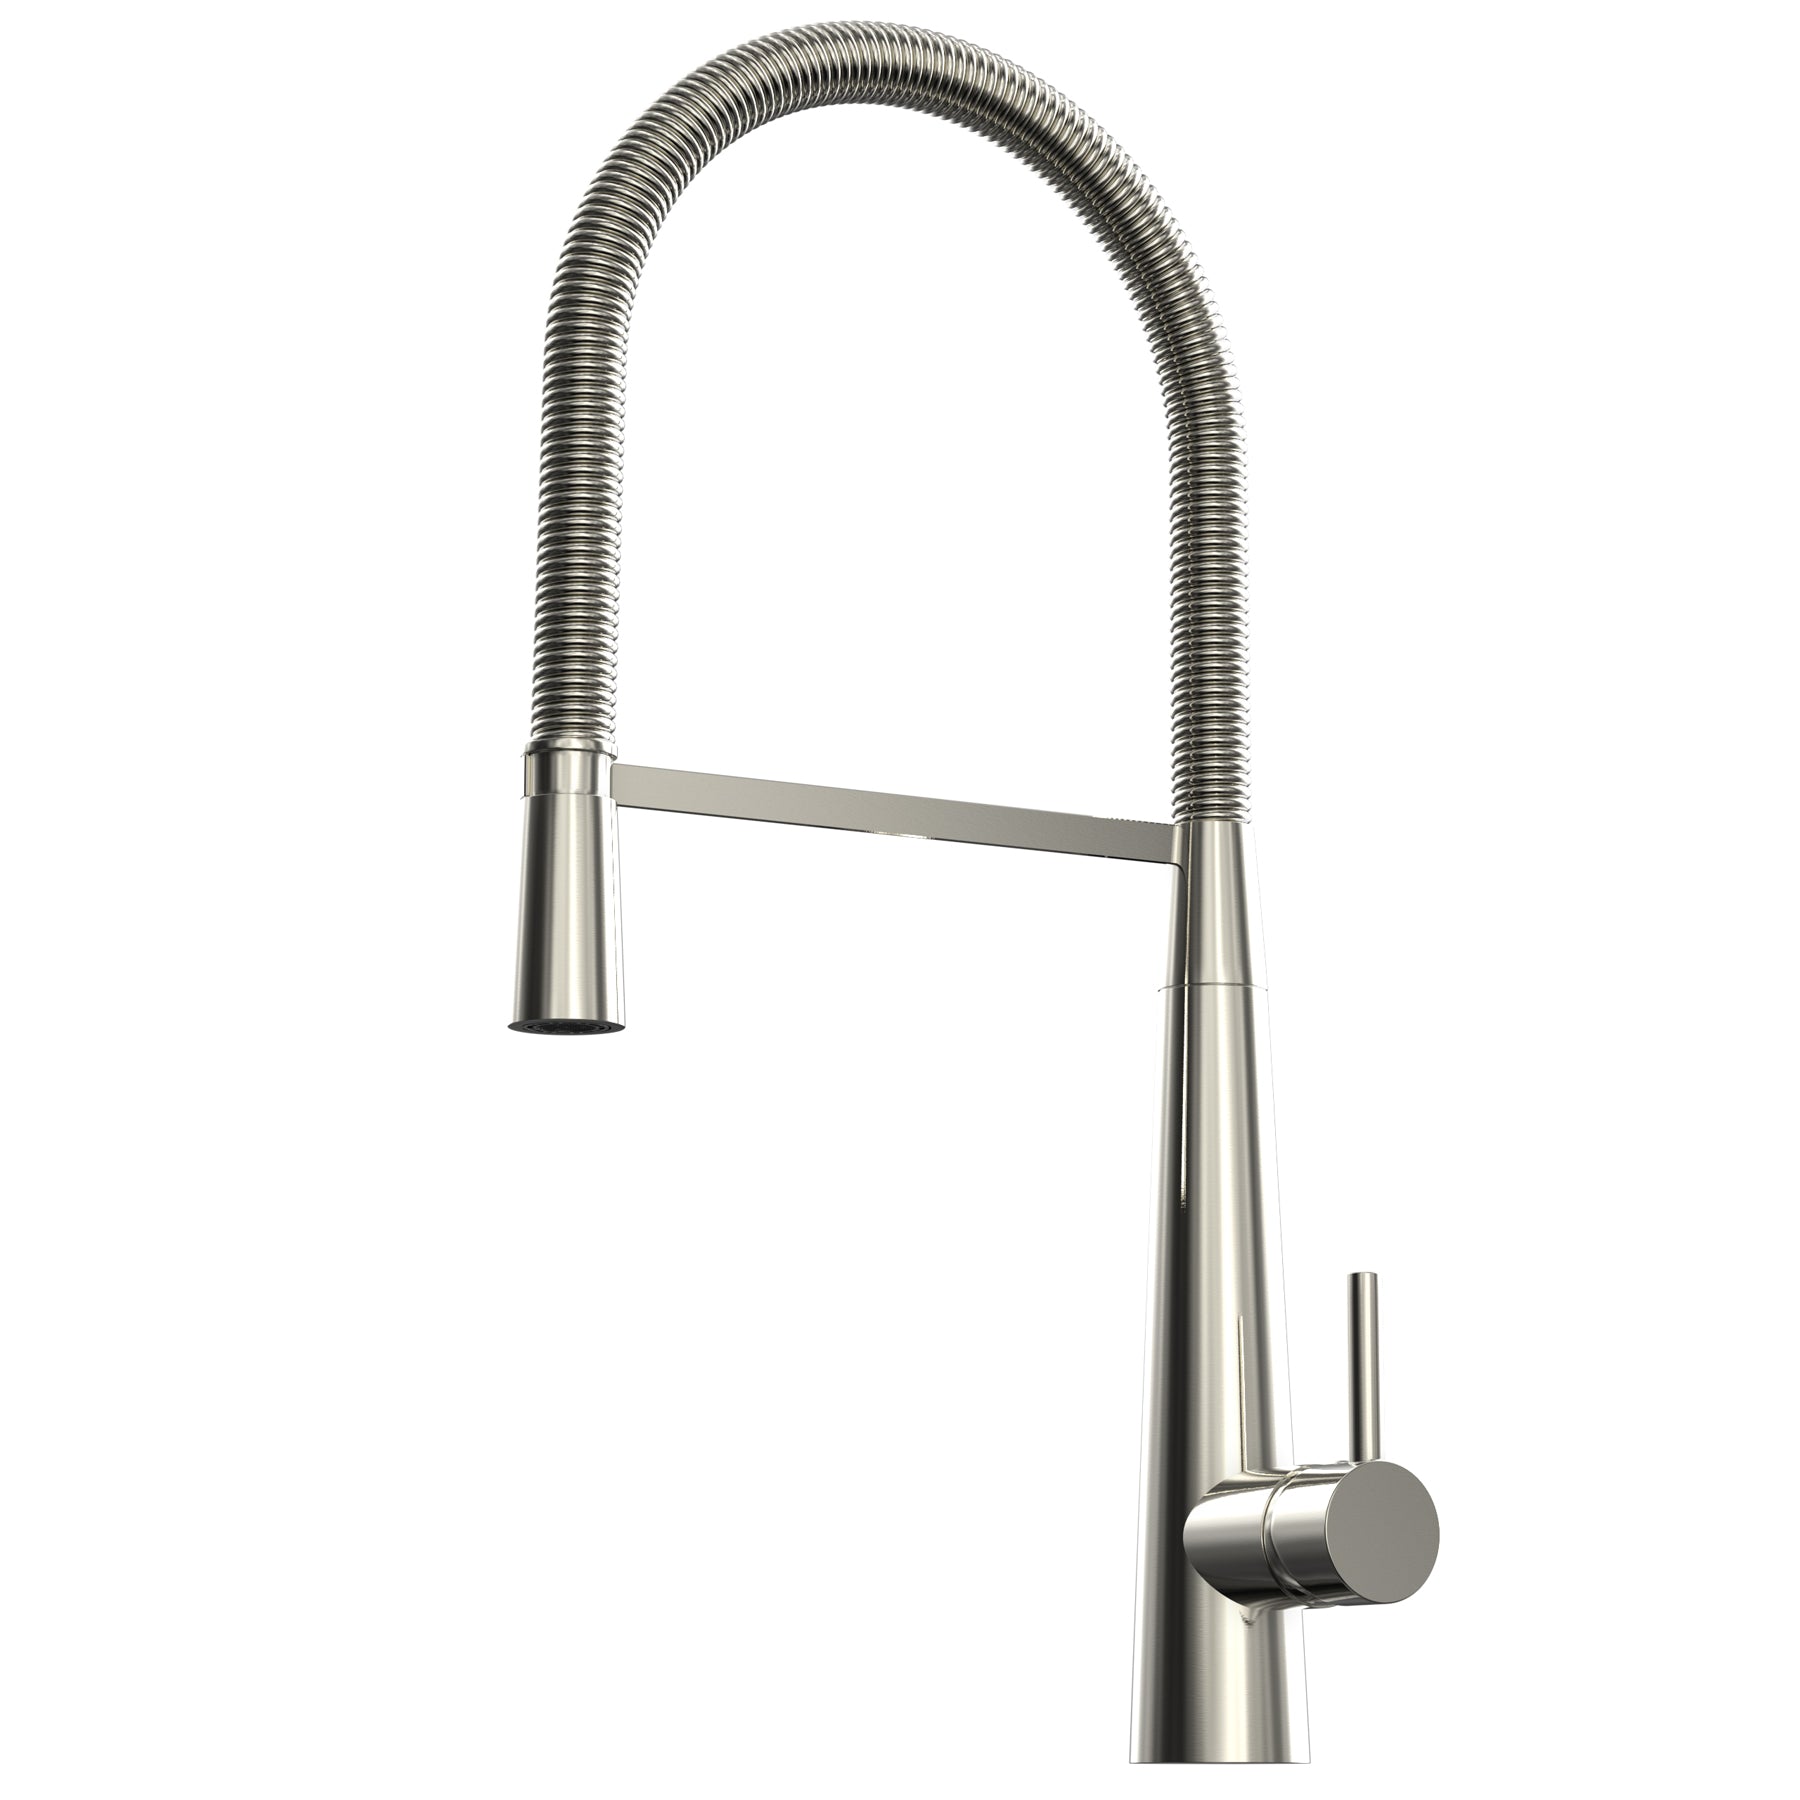 Brass Single Handle Pull Down Kitchen Faucet With Zinc Handle, Plate in Stainless